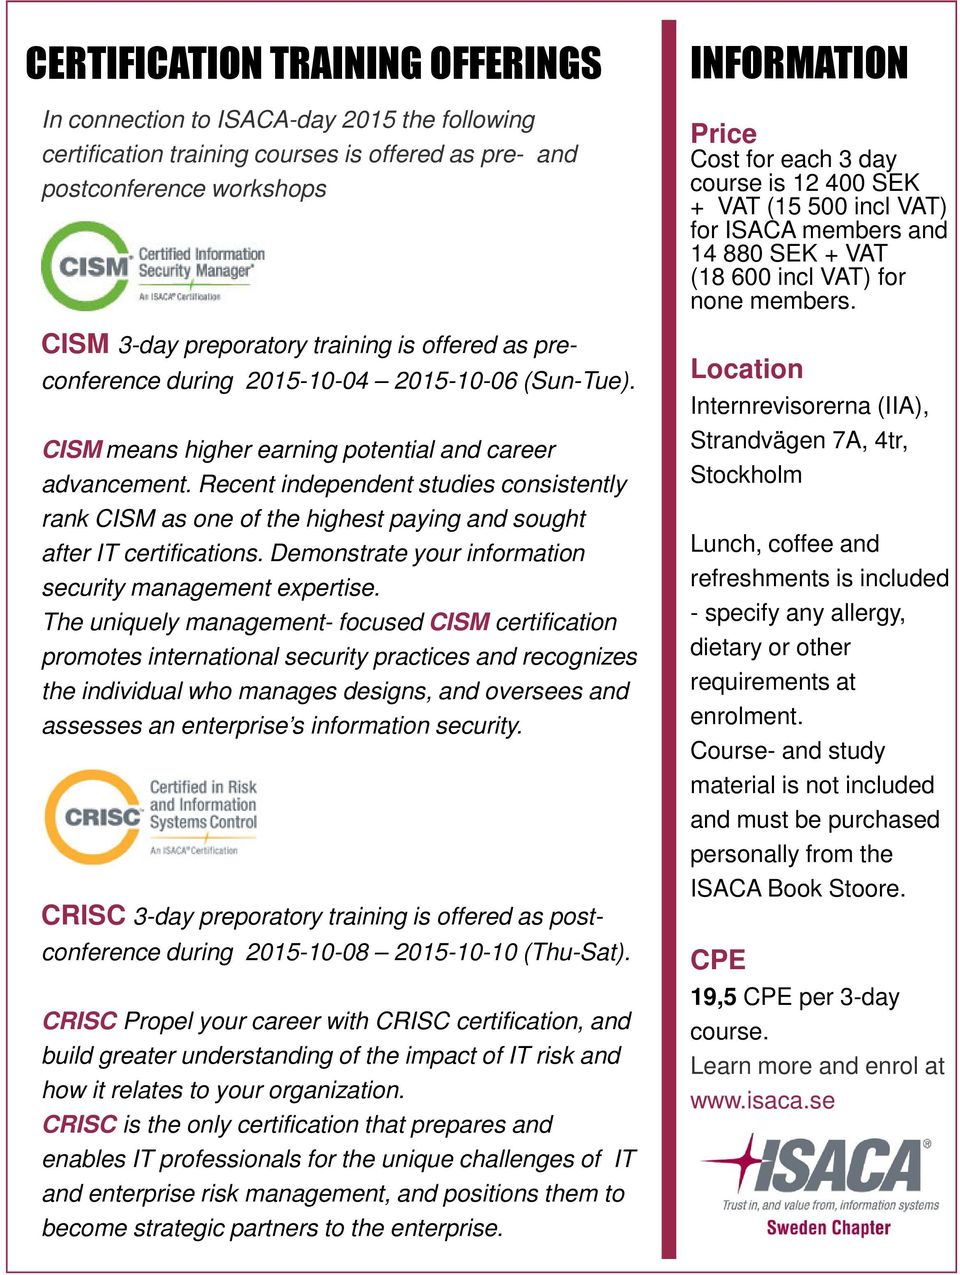 Recent independent studies consistently rank CISM as one of the highest paying and sought after IT certifications. Demonstrate your information security management expertise.